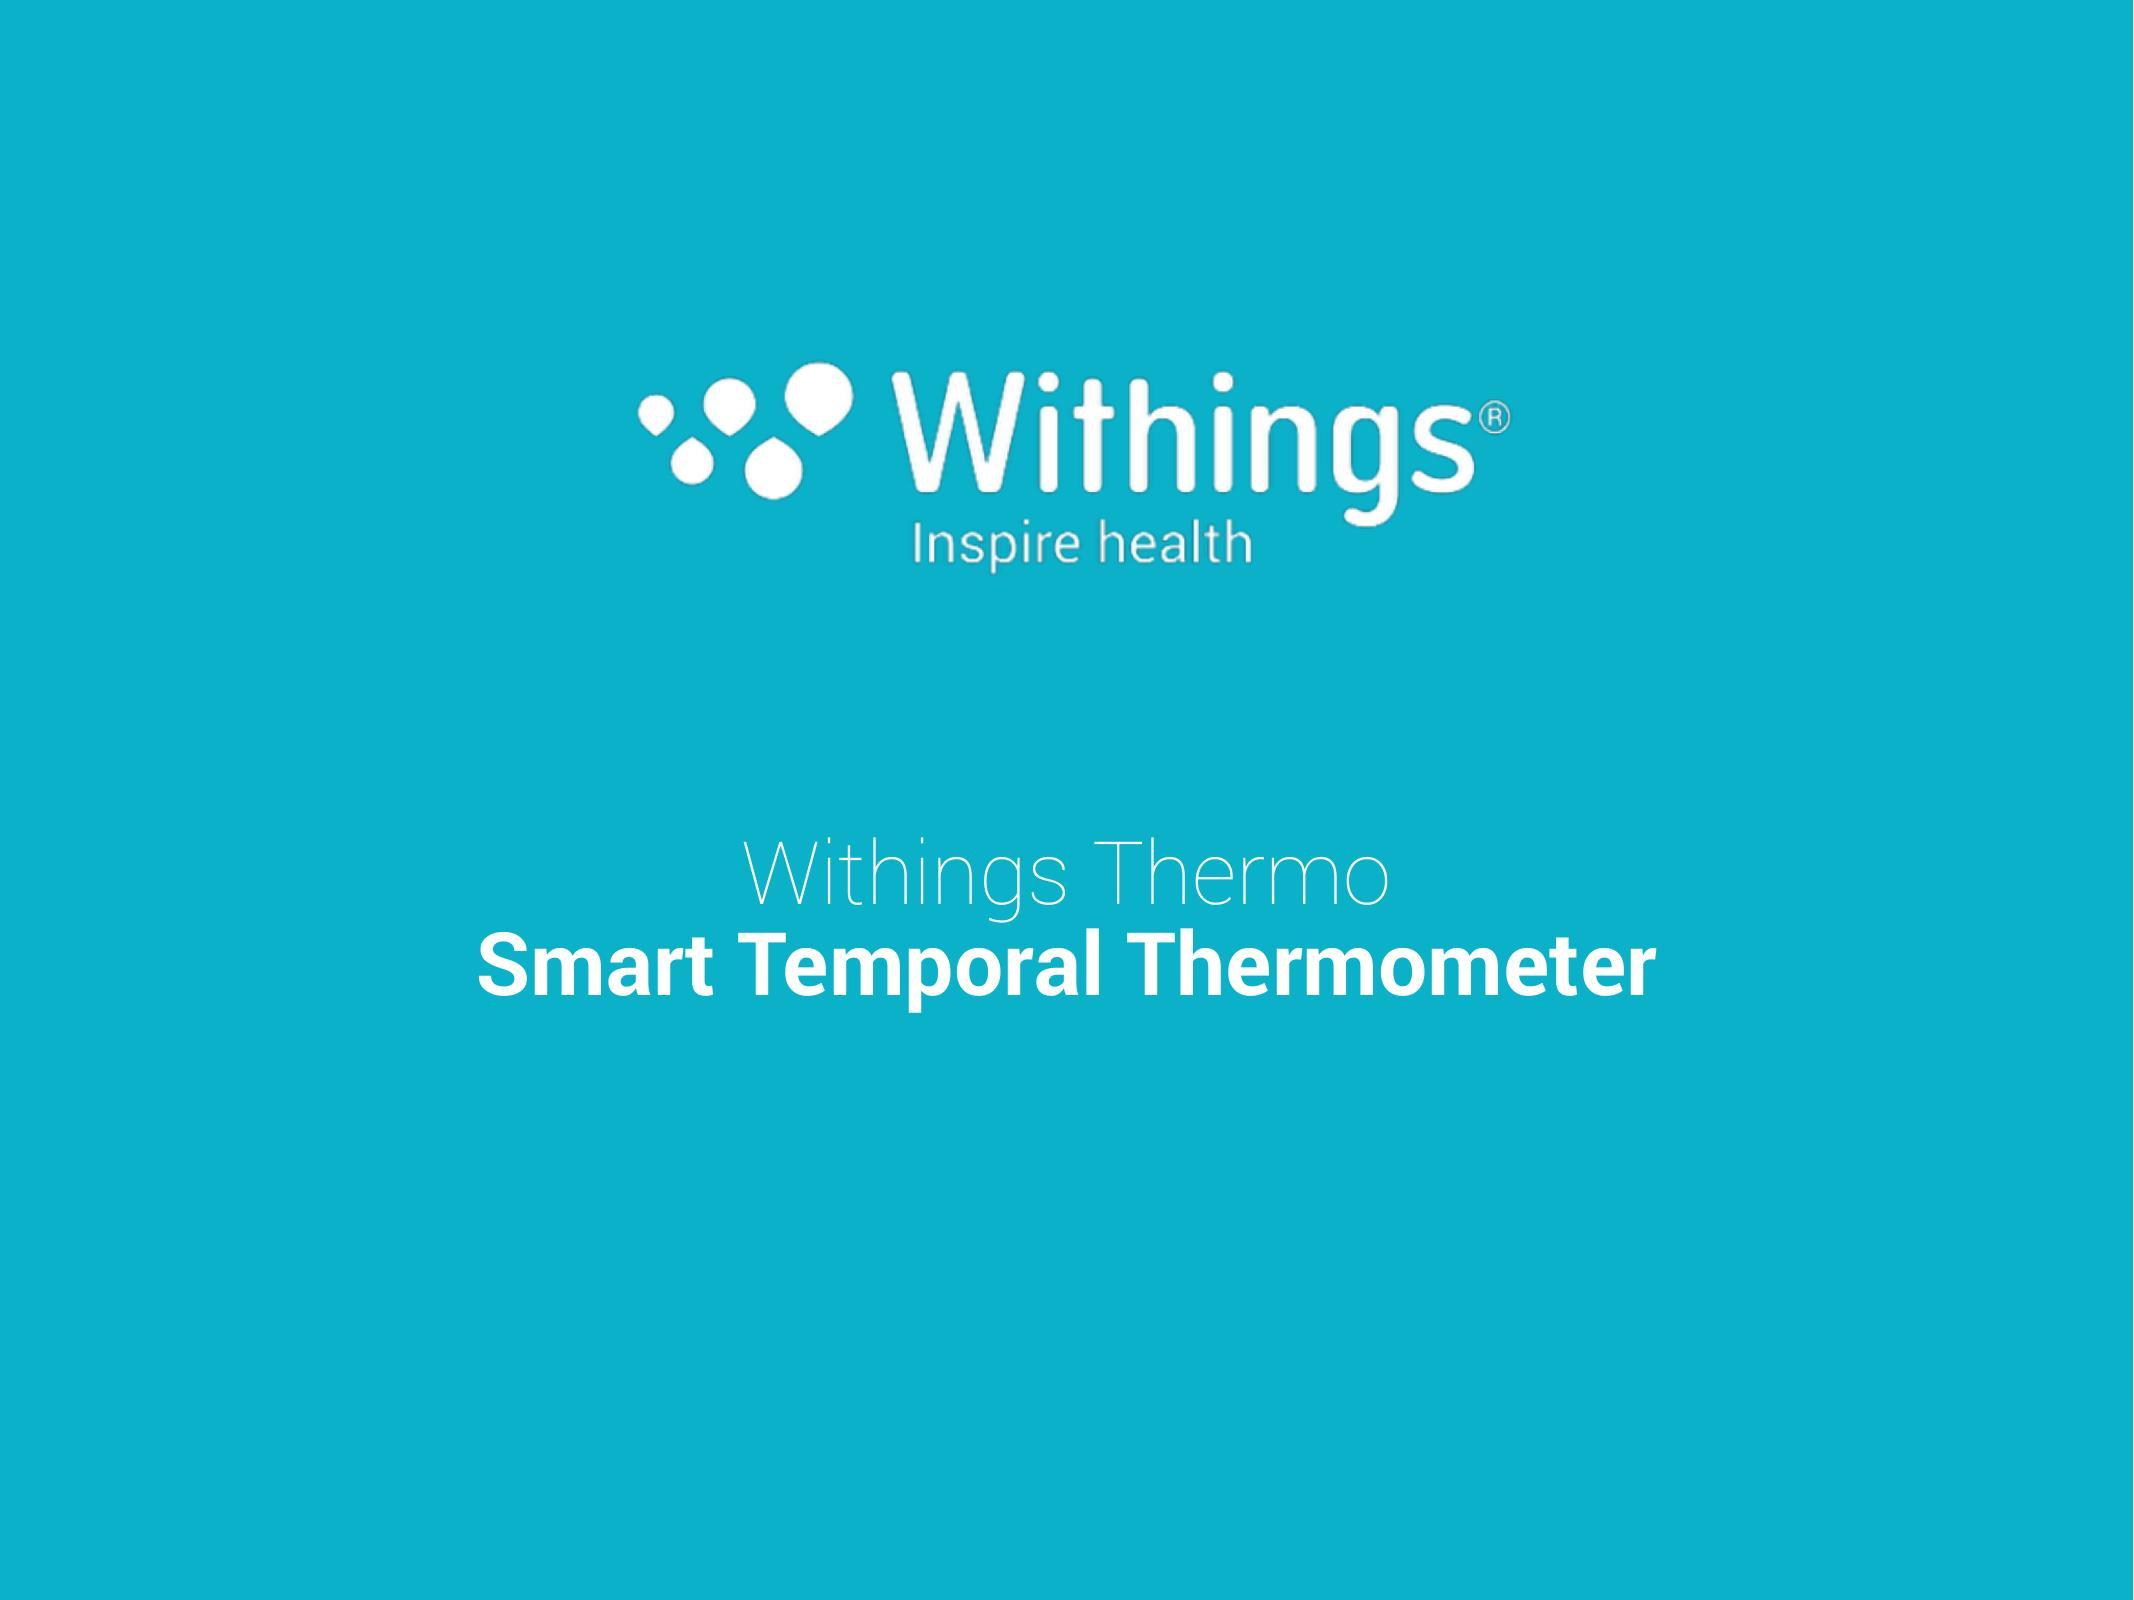 withings-inspire-health-smart-temporal-thermometer-user-manual.pdf